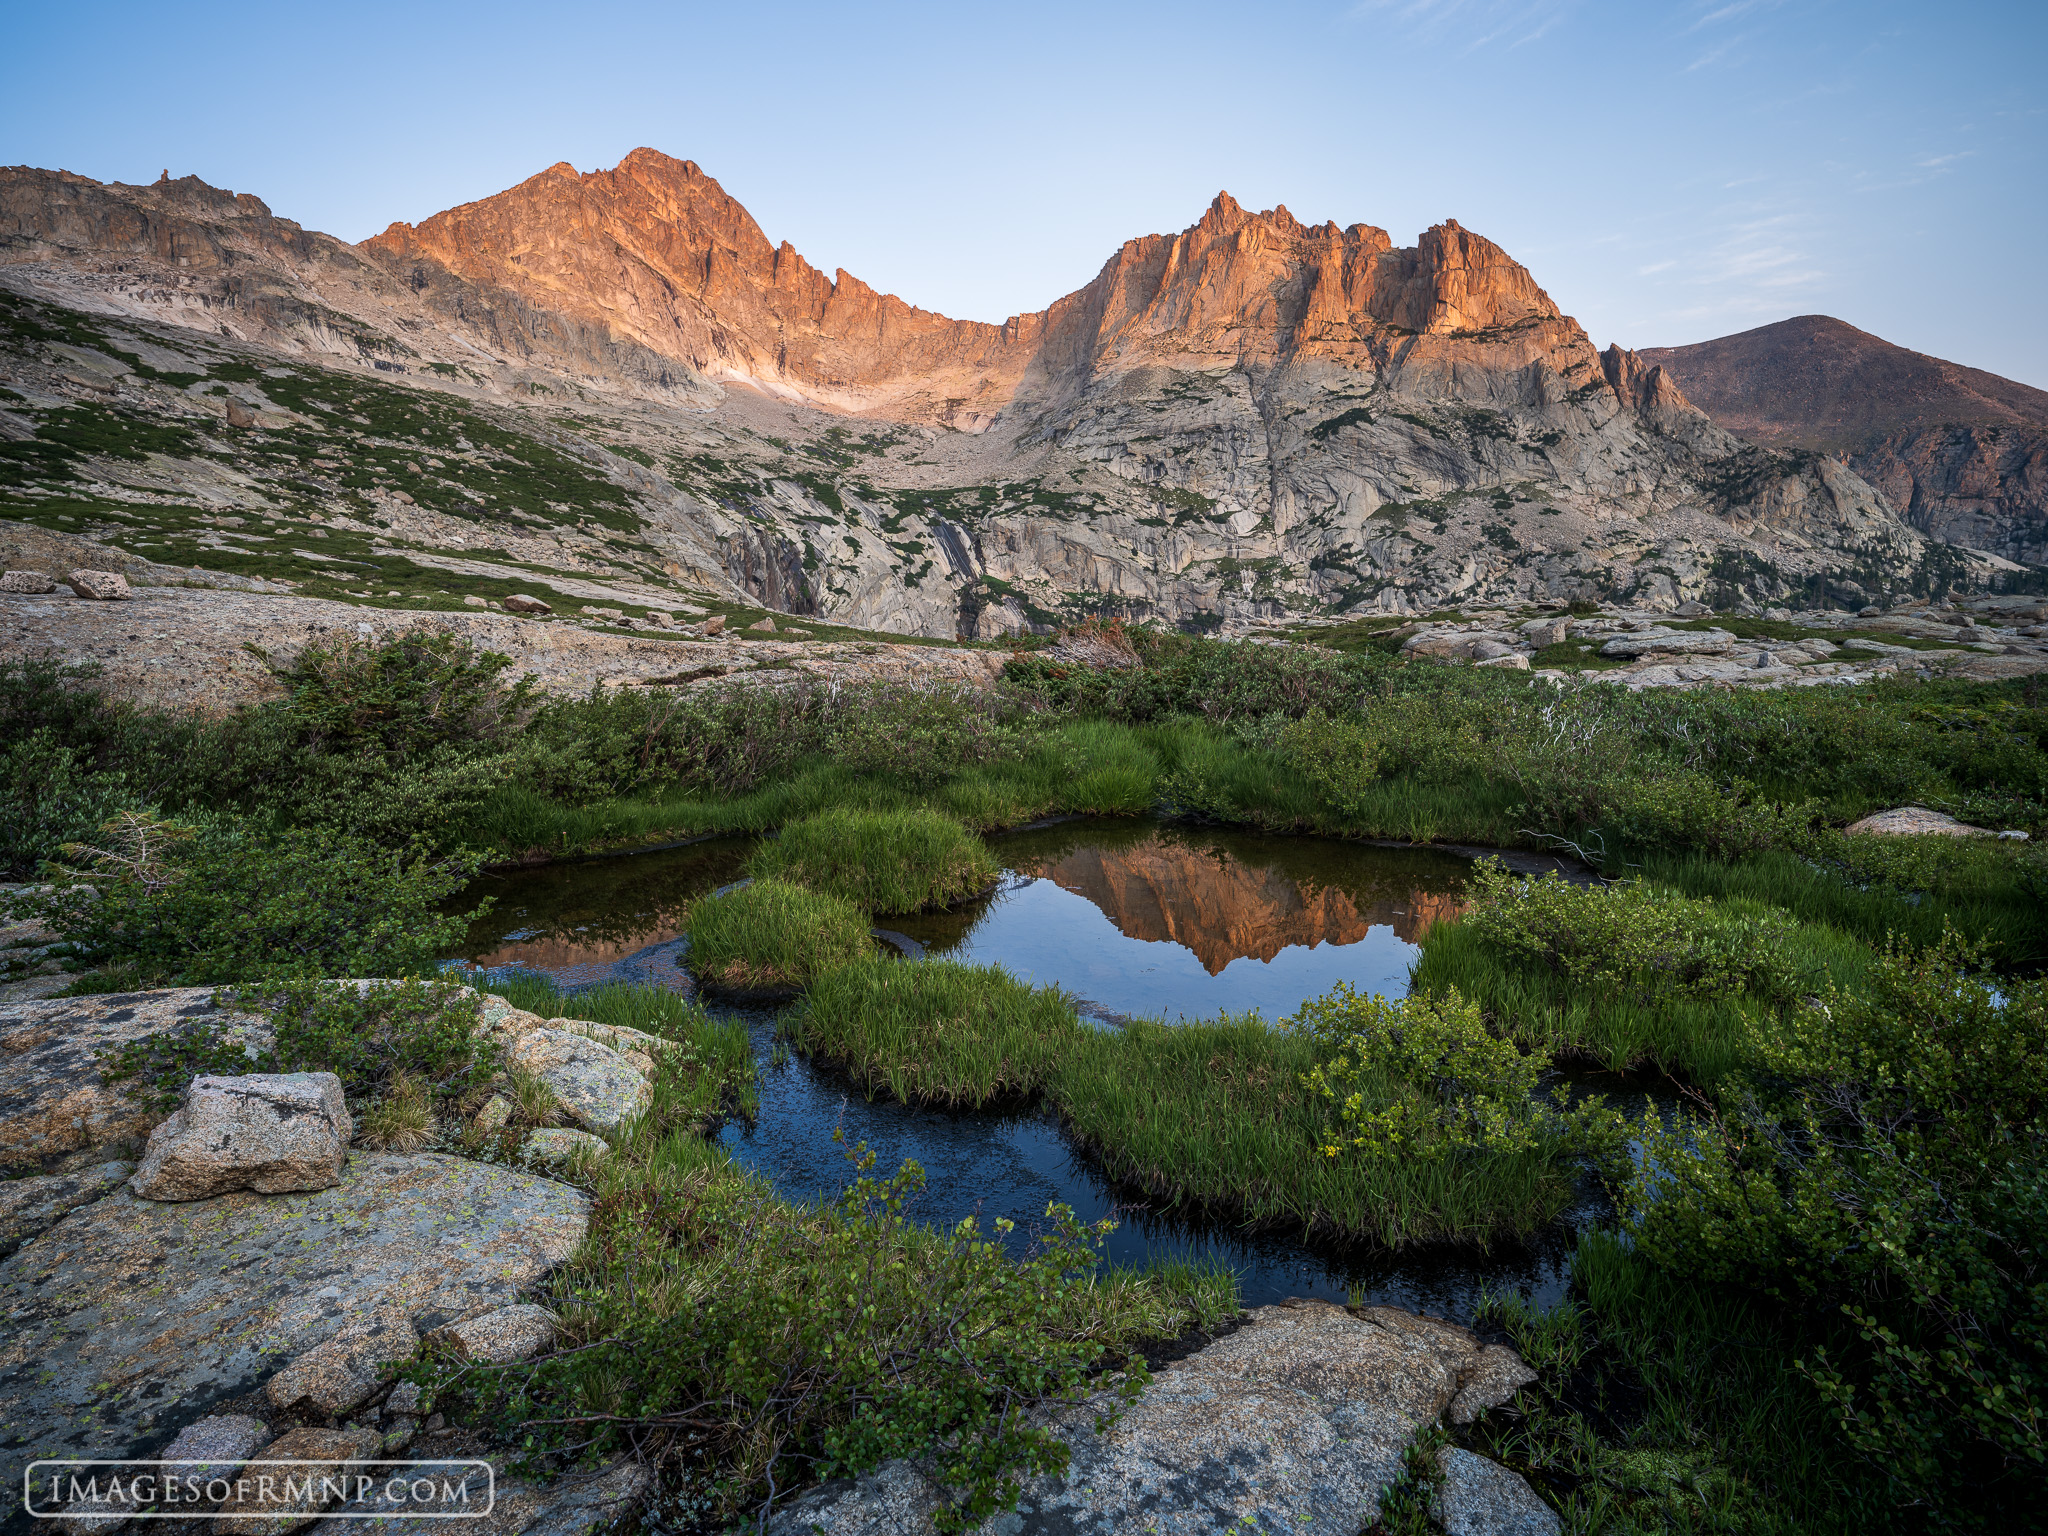 On a perfectly still August morning, the mountains bathed in the warm morning light as the tarns scattered throughout this high...